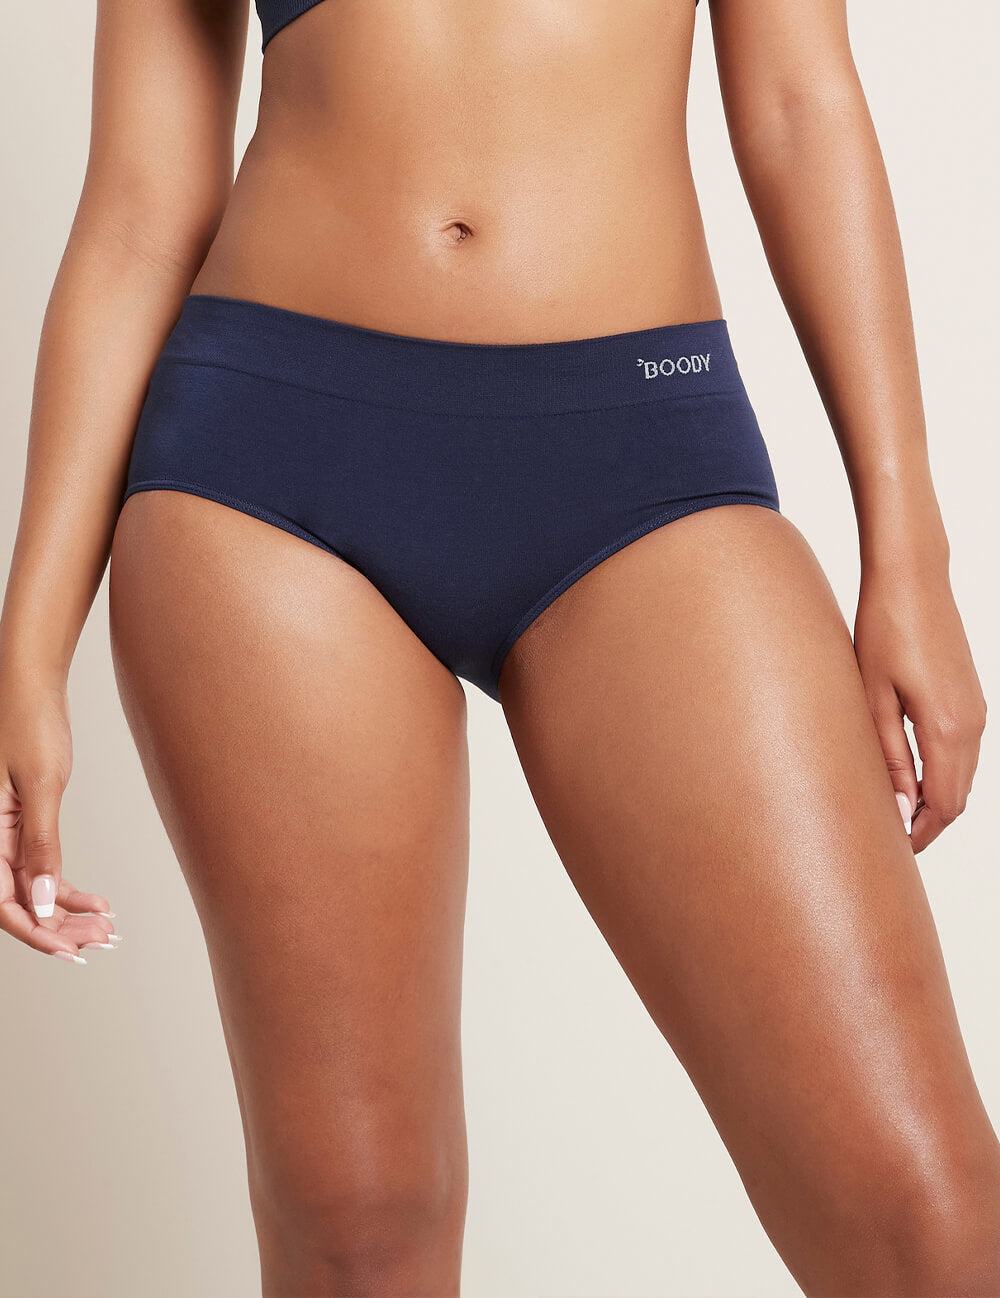 Boody Bamboo Midi Brief Full Coverage Womens Underwear in Navy Blue Front View